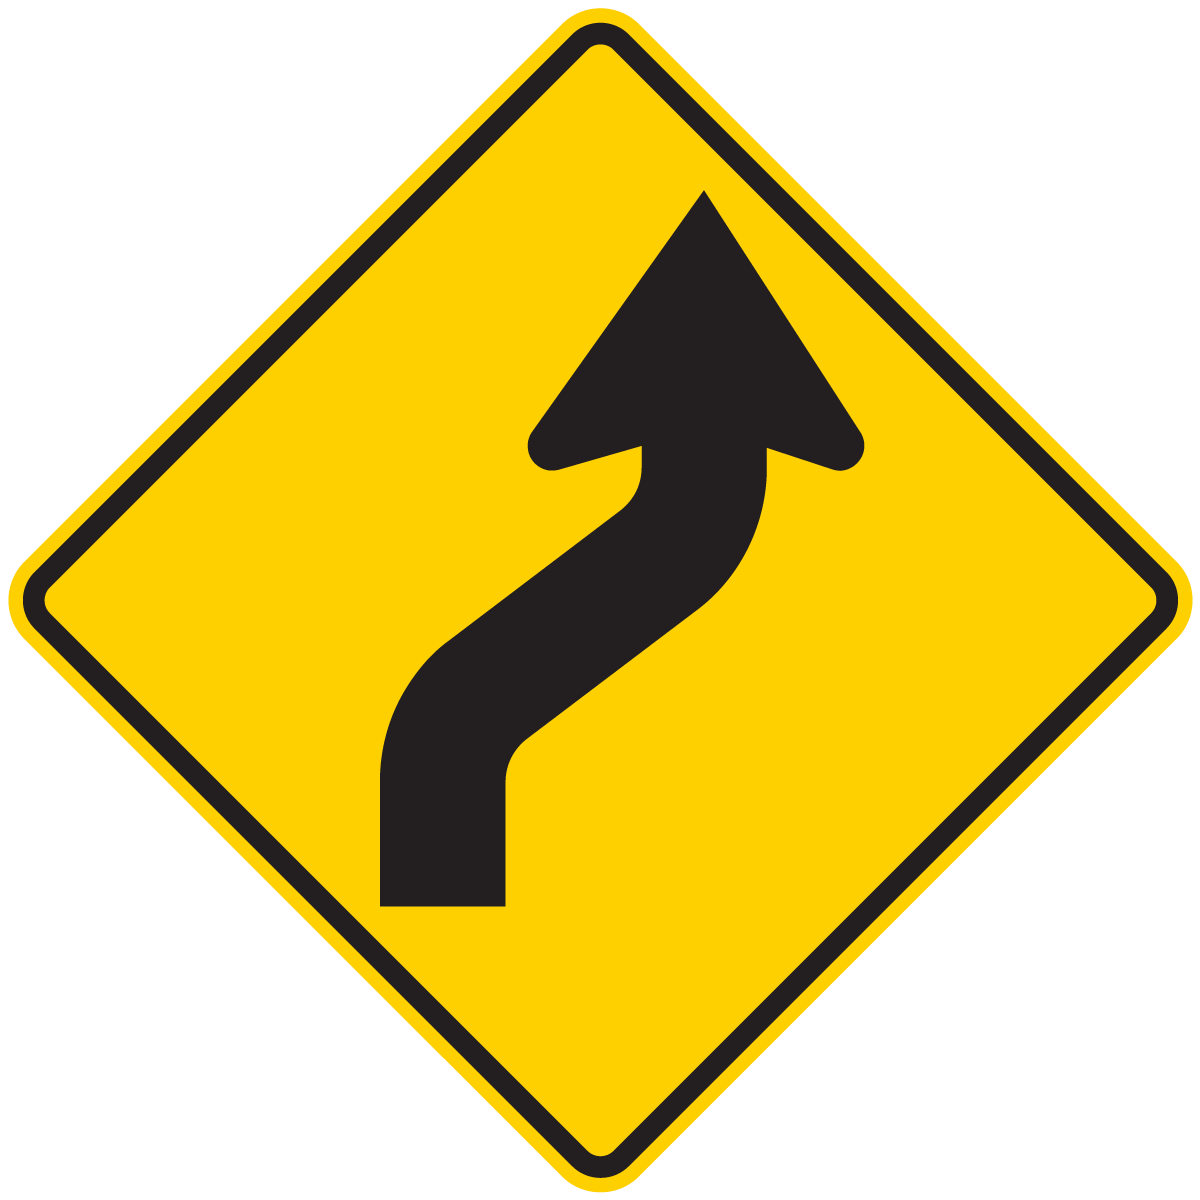 W1-4 Reverse Curve (Left or Right)